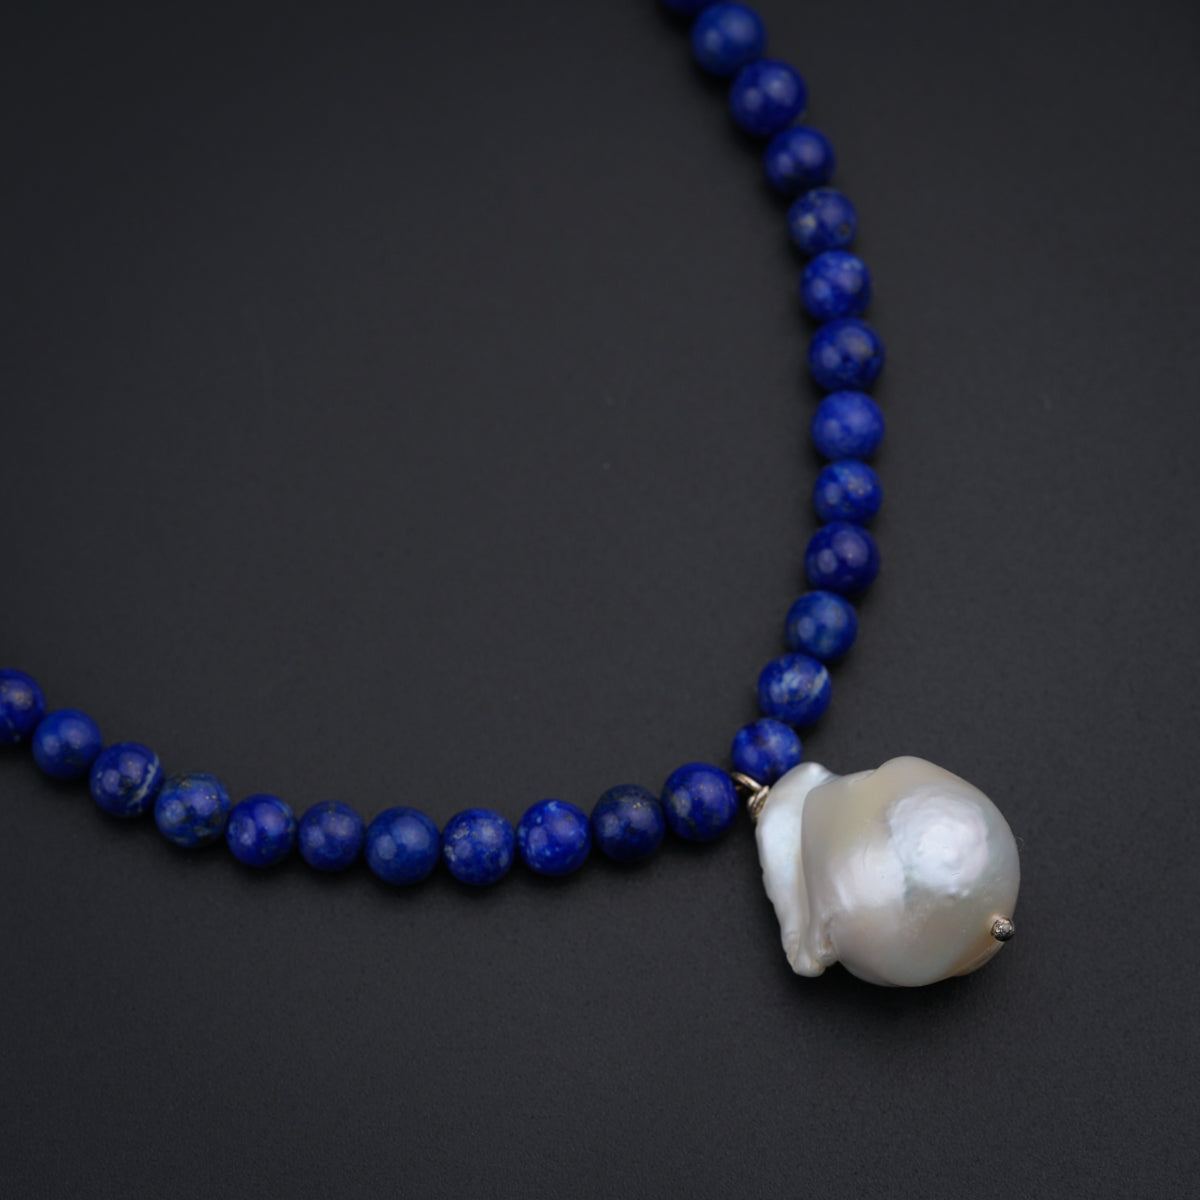 a blue beaded necklace with a white shell on it